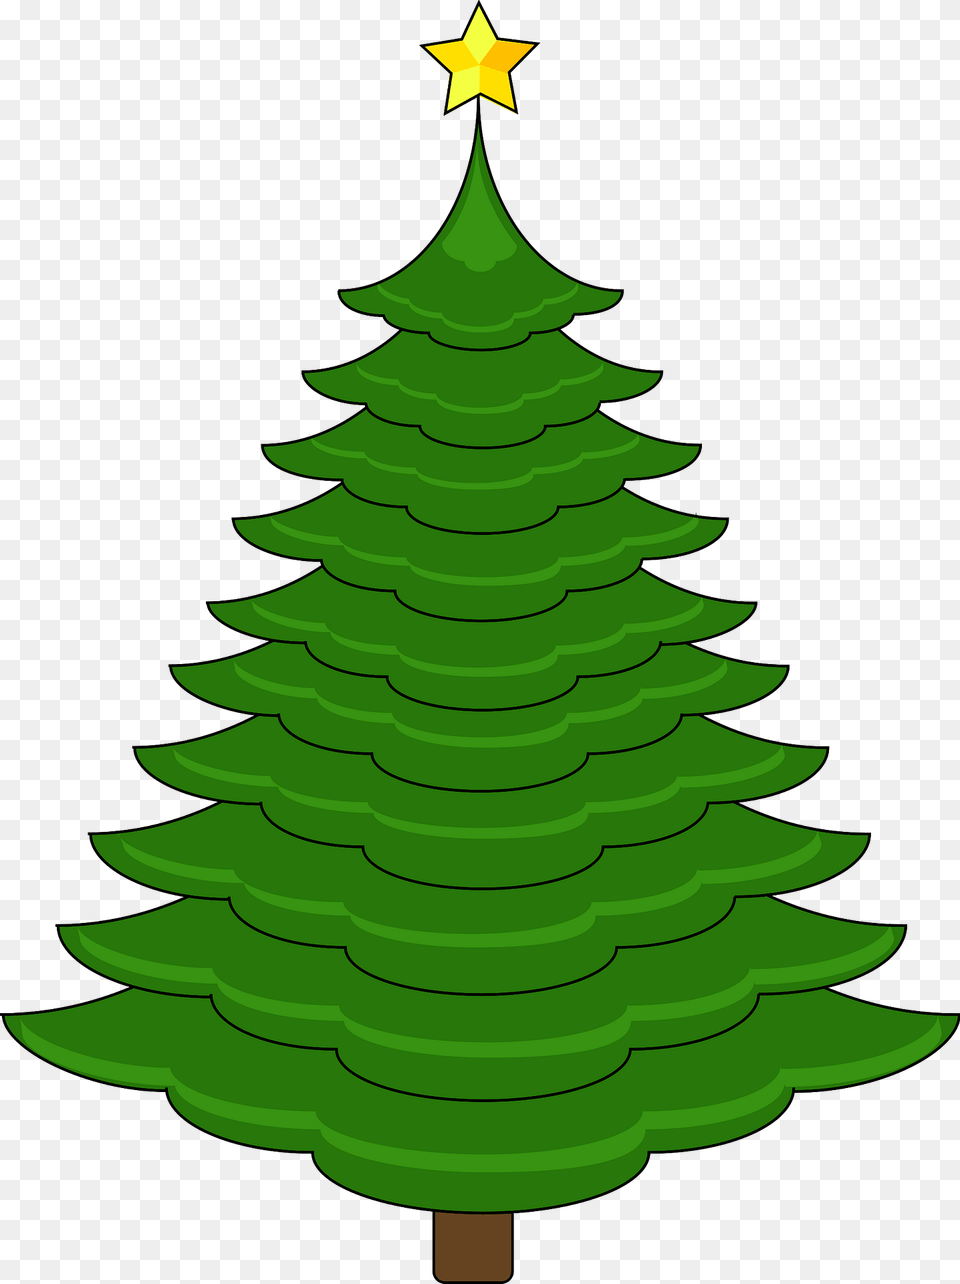 Evergreen Tree With A Star On Top Clipart, Plant, Fir, Green, Pine Free Png Download